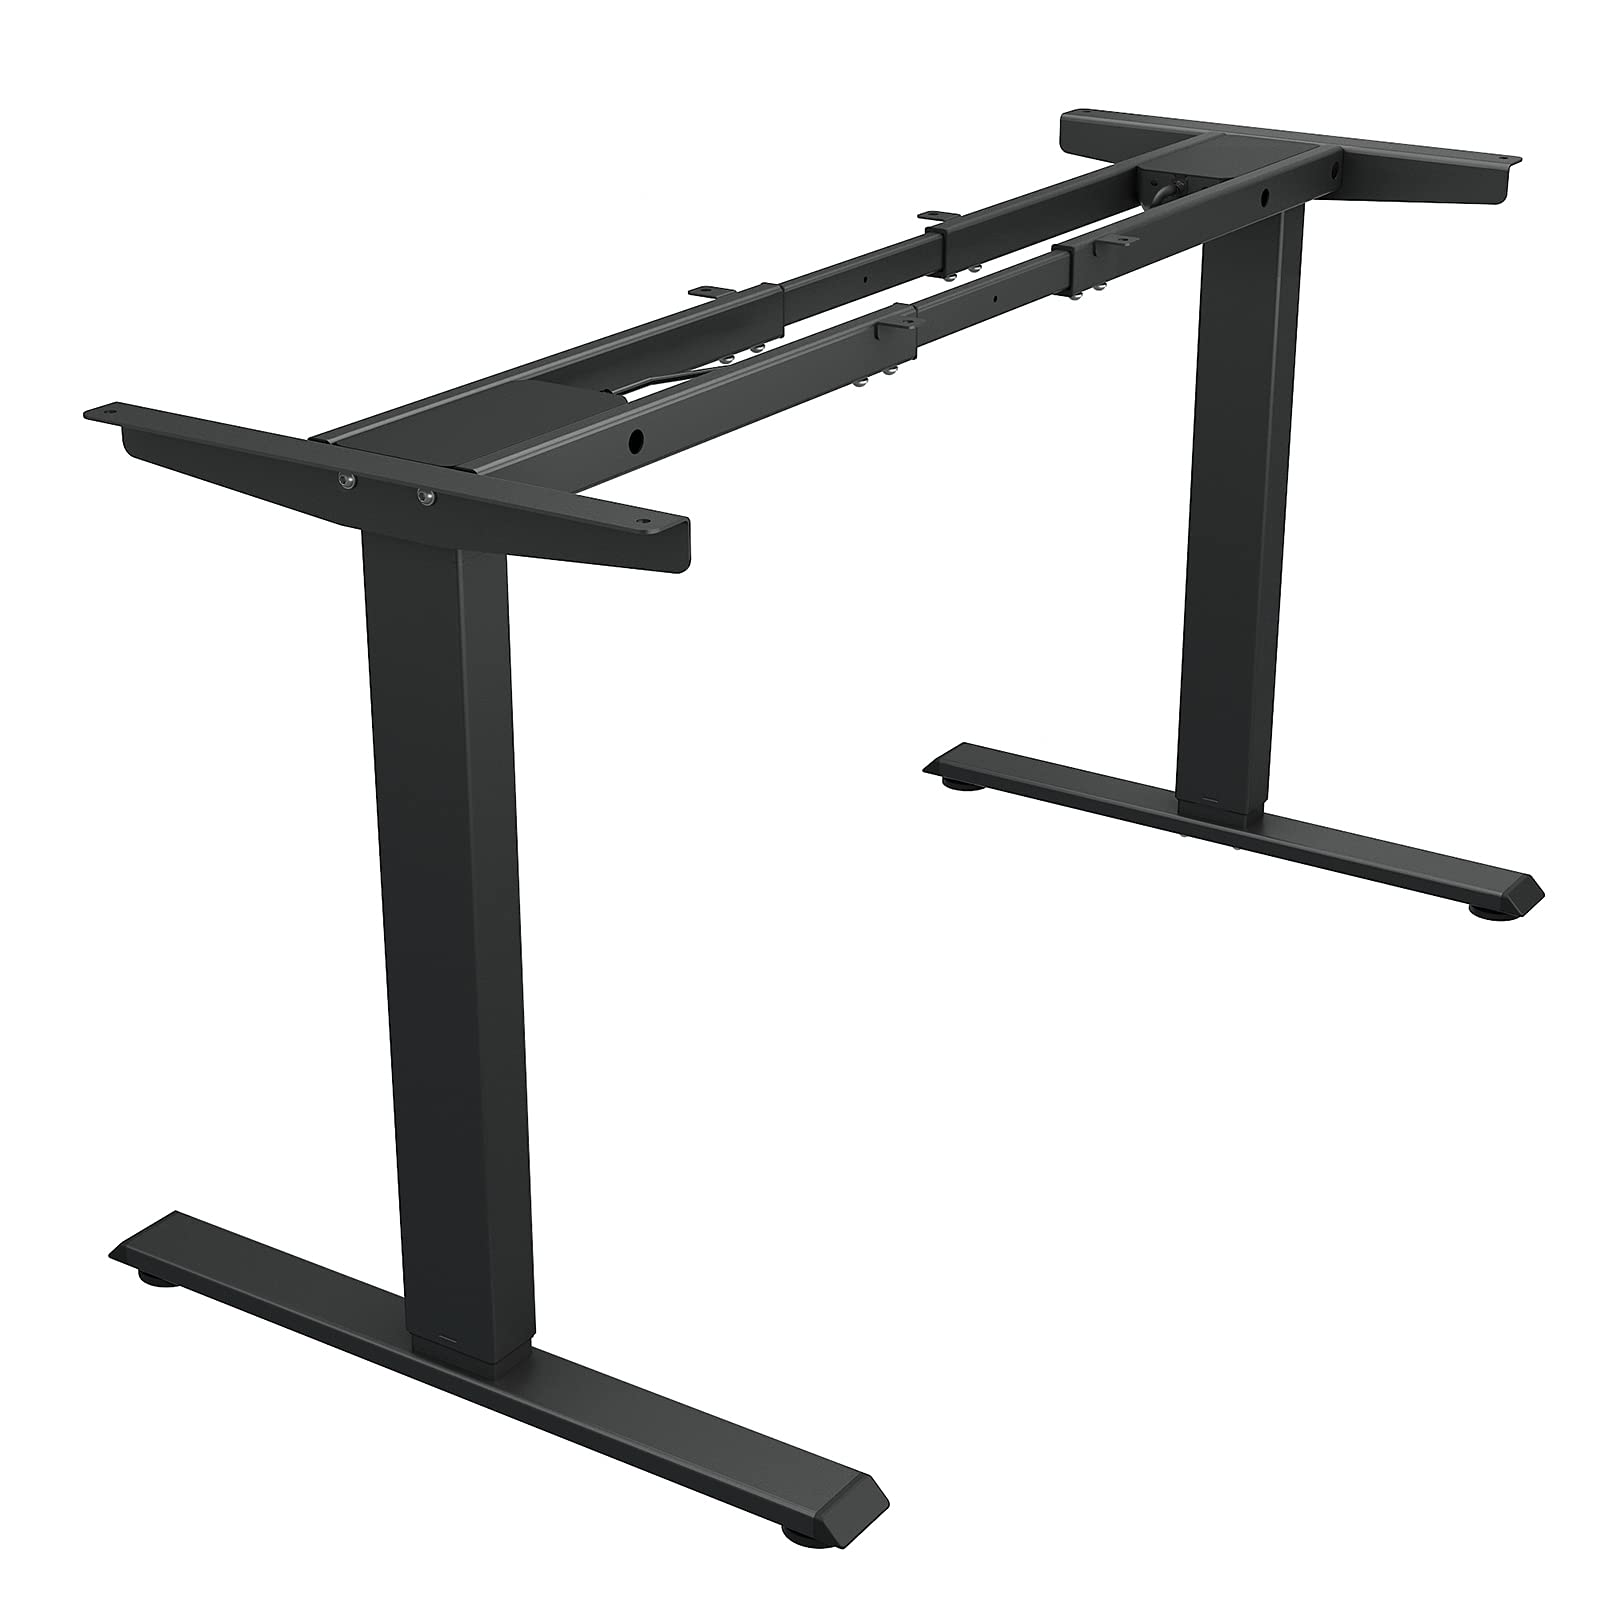 TOPSKY Dual Motor Electric Adjustable Standing Computer Desk for Home and Office (Black Frame only) $200